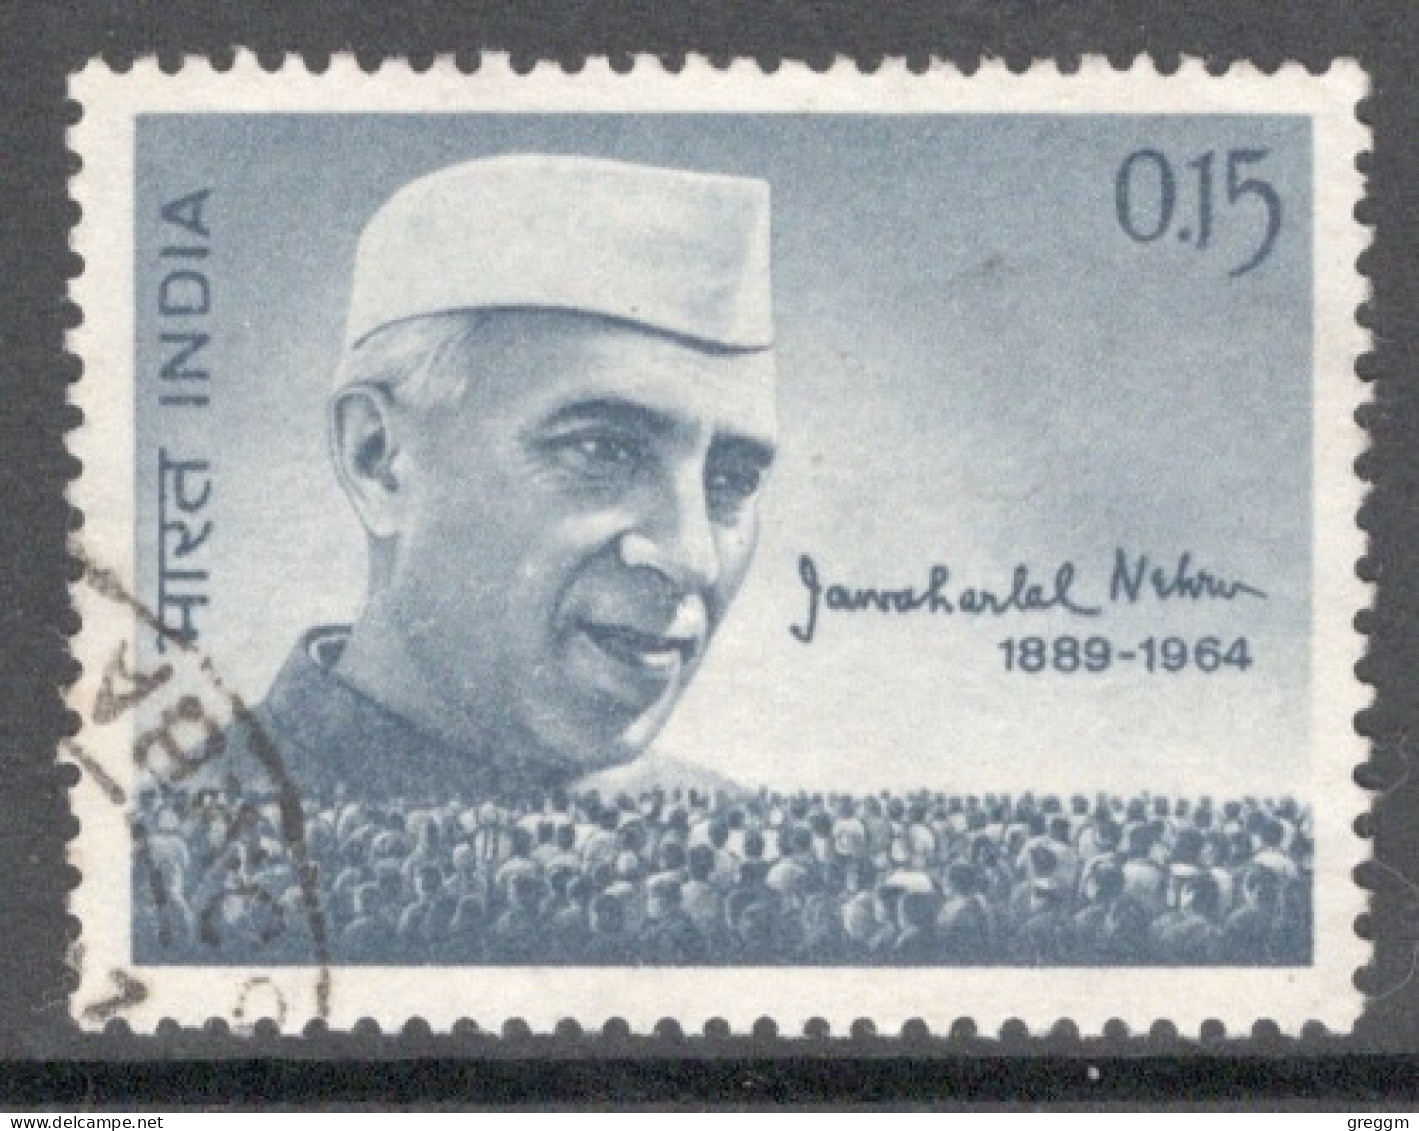 India 1964 Single 15np Stamp Celebrating S.D. Nehru In Fine Used - Used Stamps